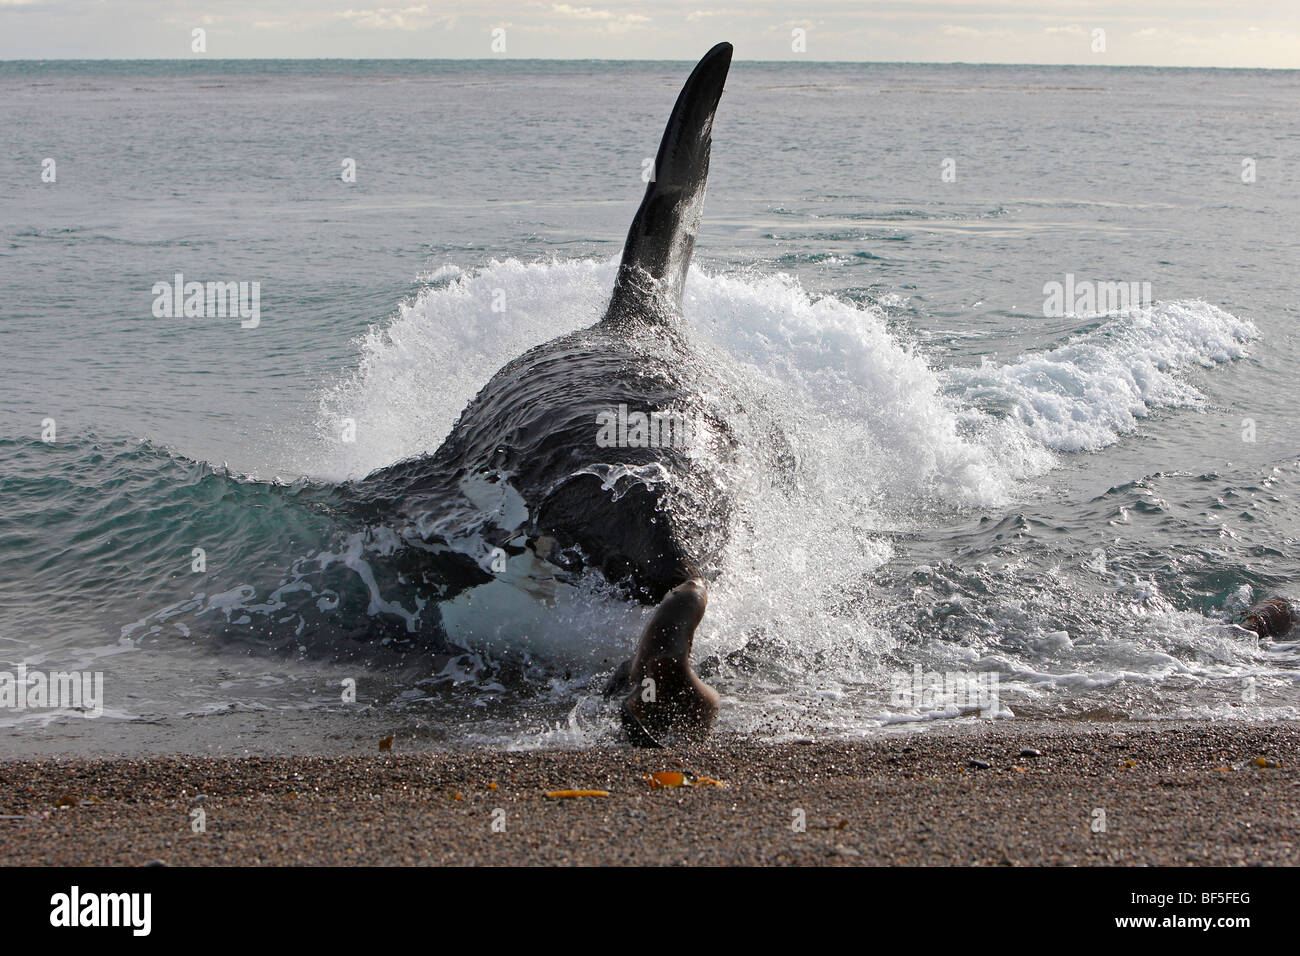 Orca Whale (Orcinus orca). Male attacking a young Southern Sea Lion (Otaria flavescens, Otaria byronia) on the beach. Stock Photo